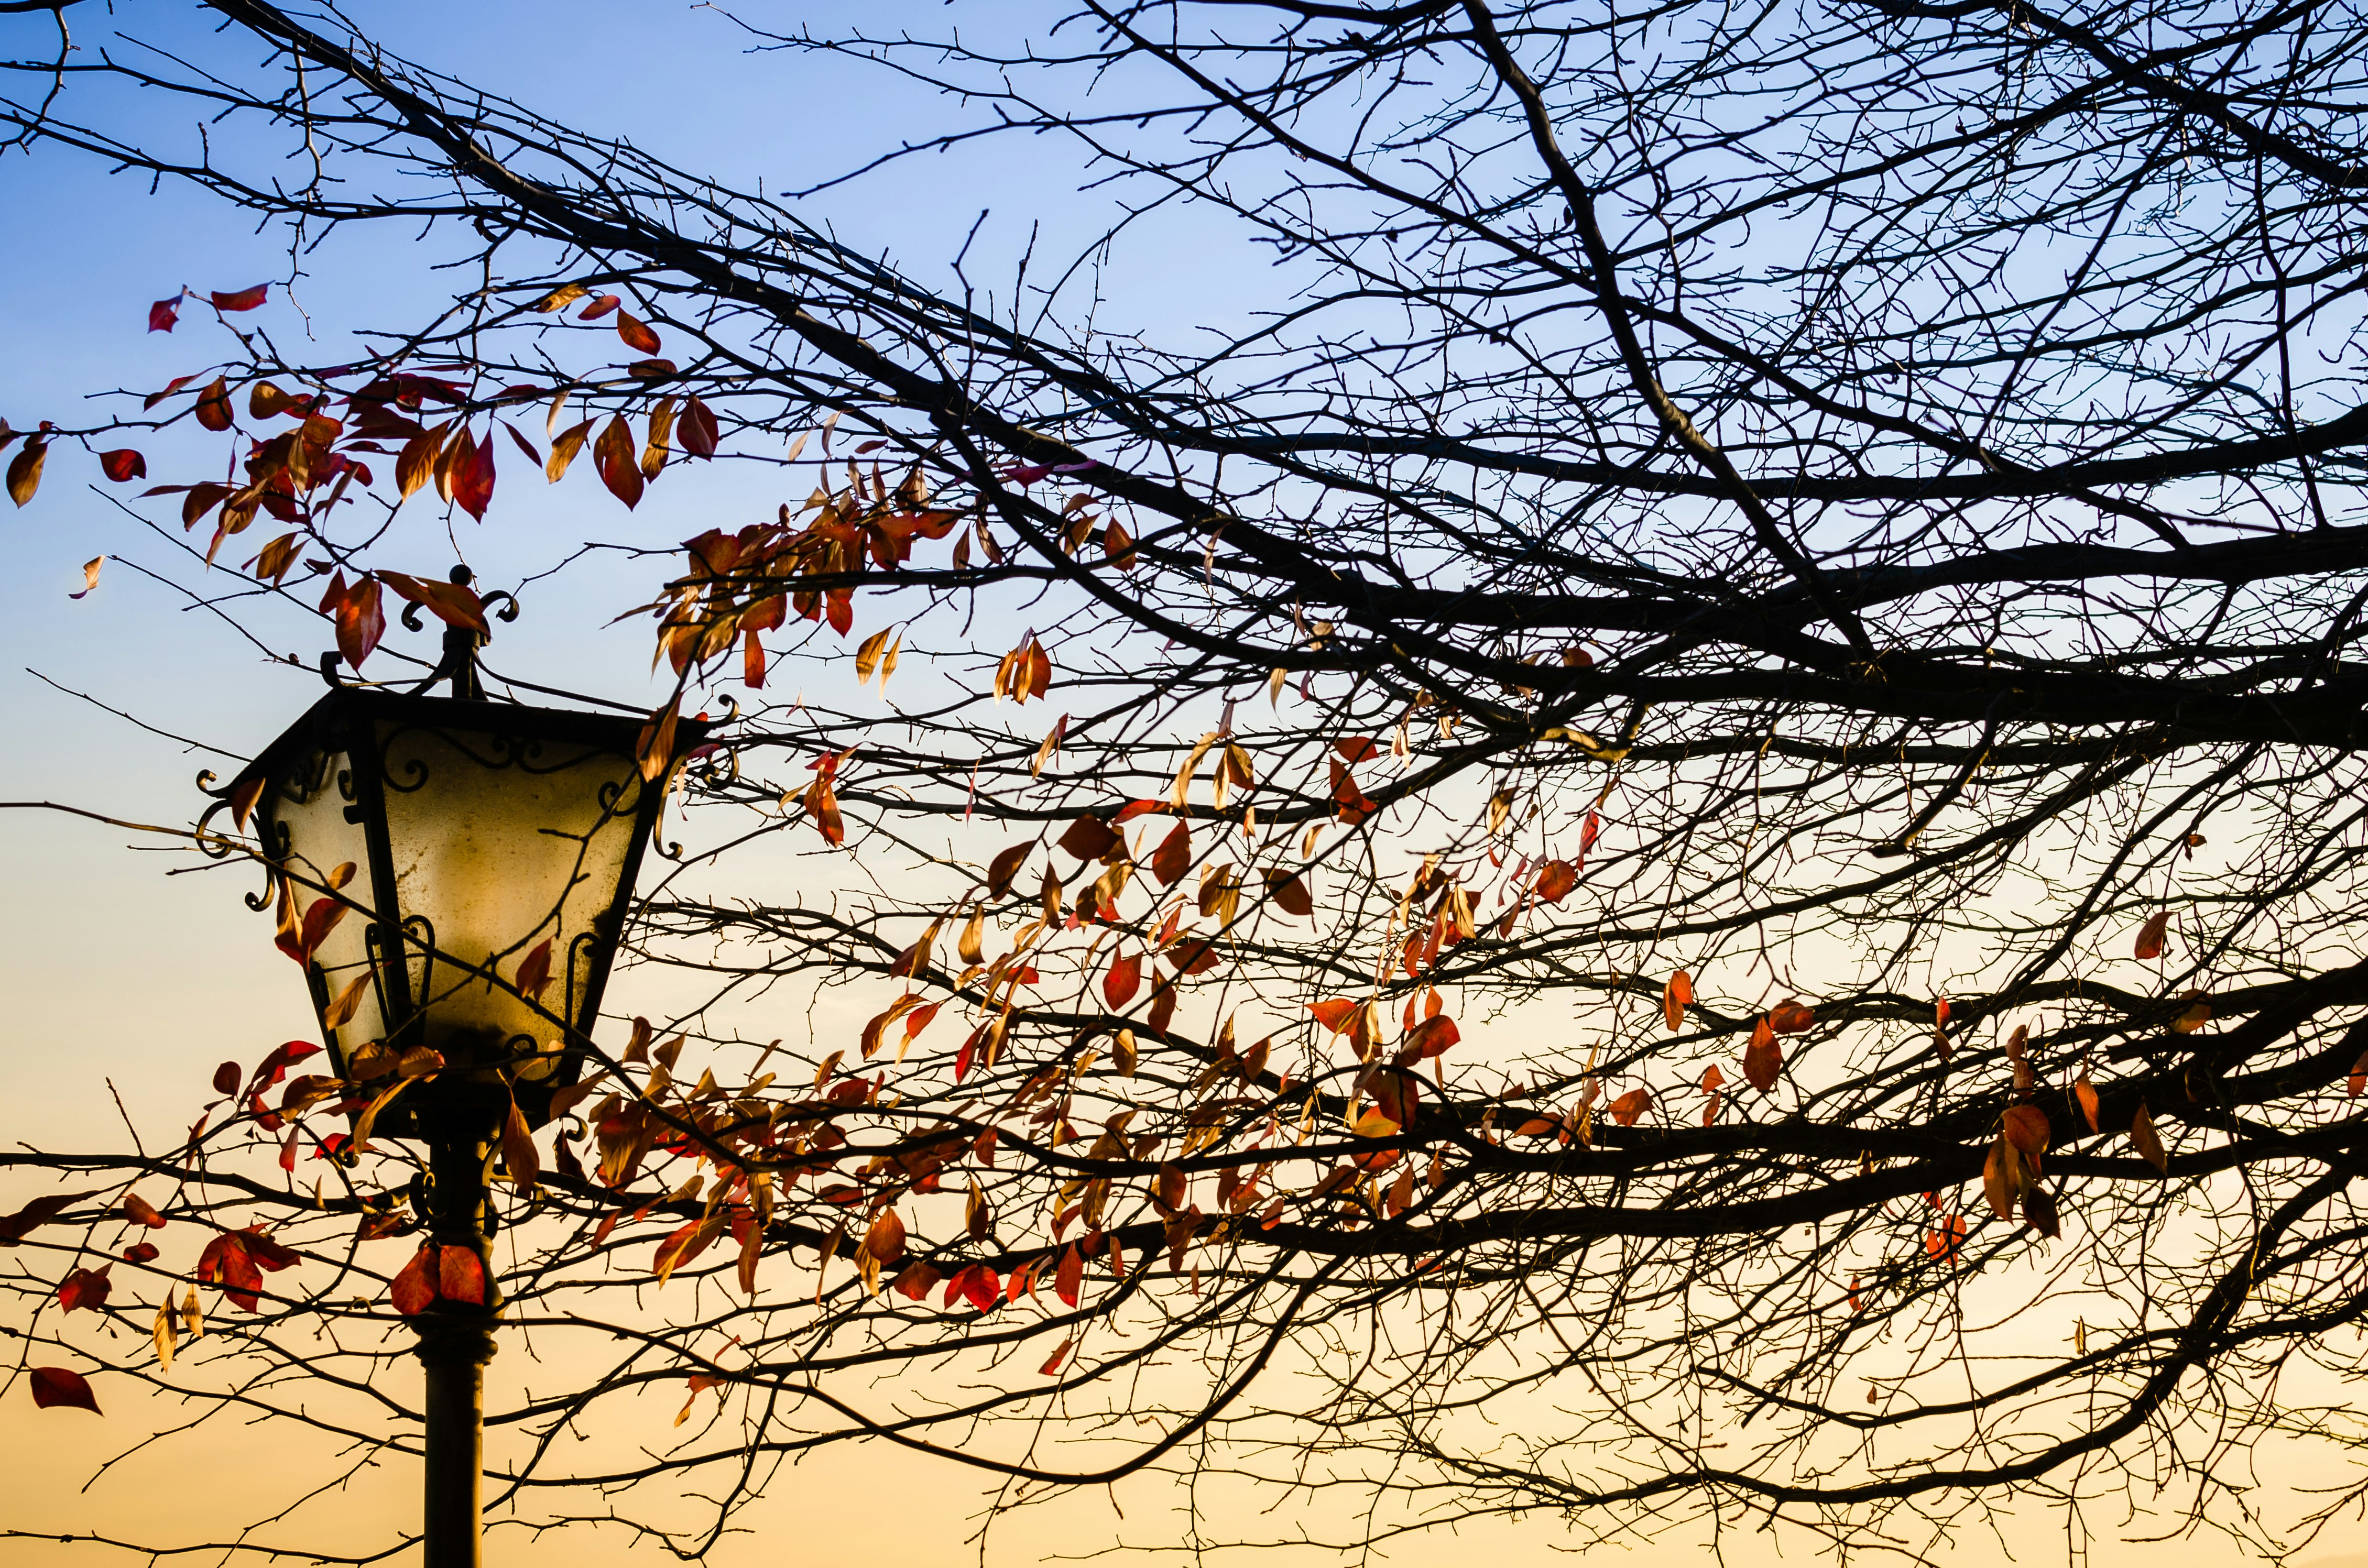 The moment I saw the colors of the susnet, the old style street lamp, and the autumn leaves, I felt immediately a romantic atmosphere I had to capture with my gear.